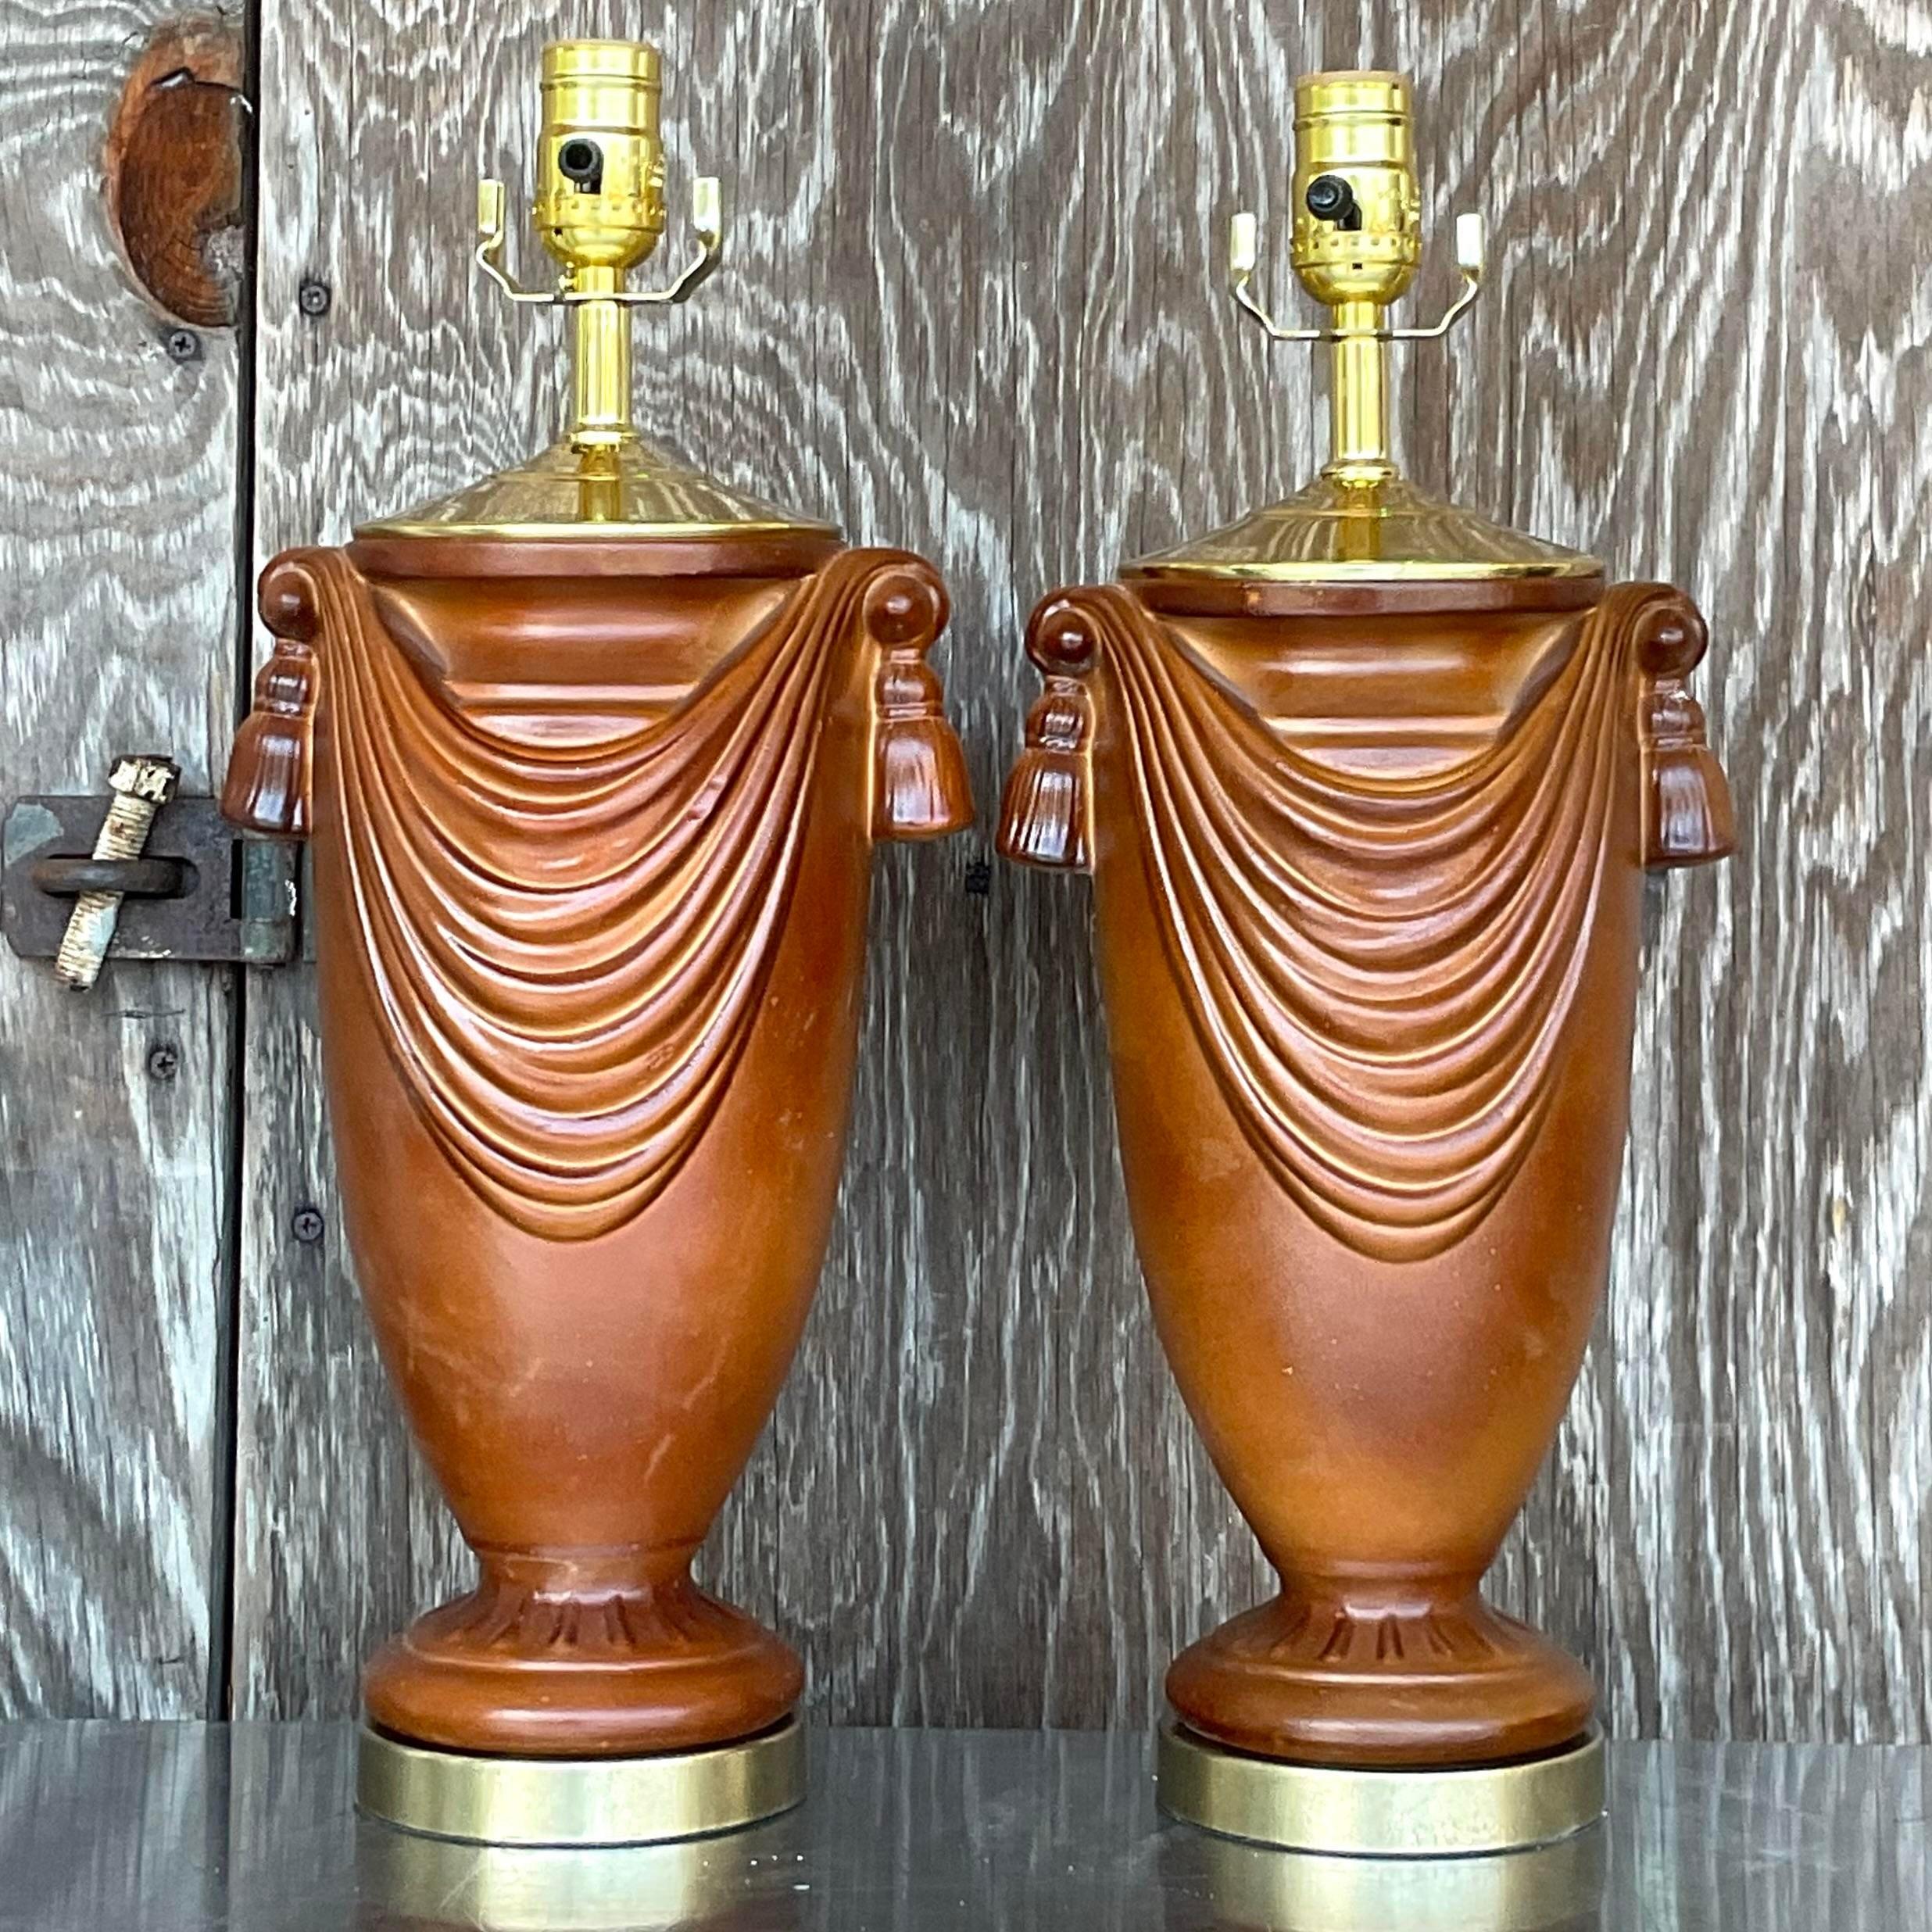 A fabulous pair of vintage Boho table lamps. A chic swag design in a gorgeous matte chocolate finish. Fully restored with all new wiring, hardware and brass plinths. Acquired from a Palm Beach estate.